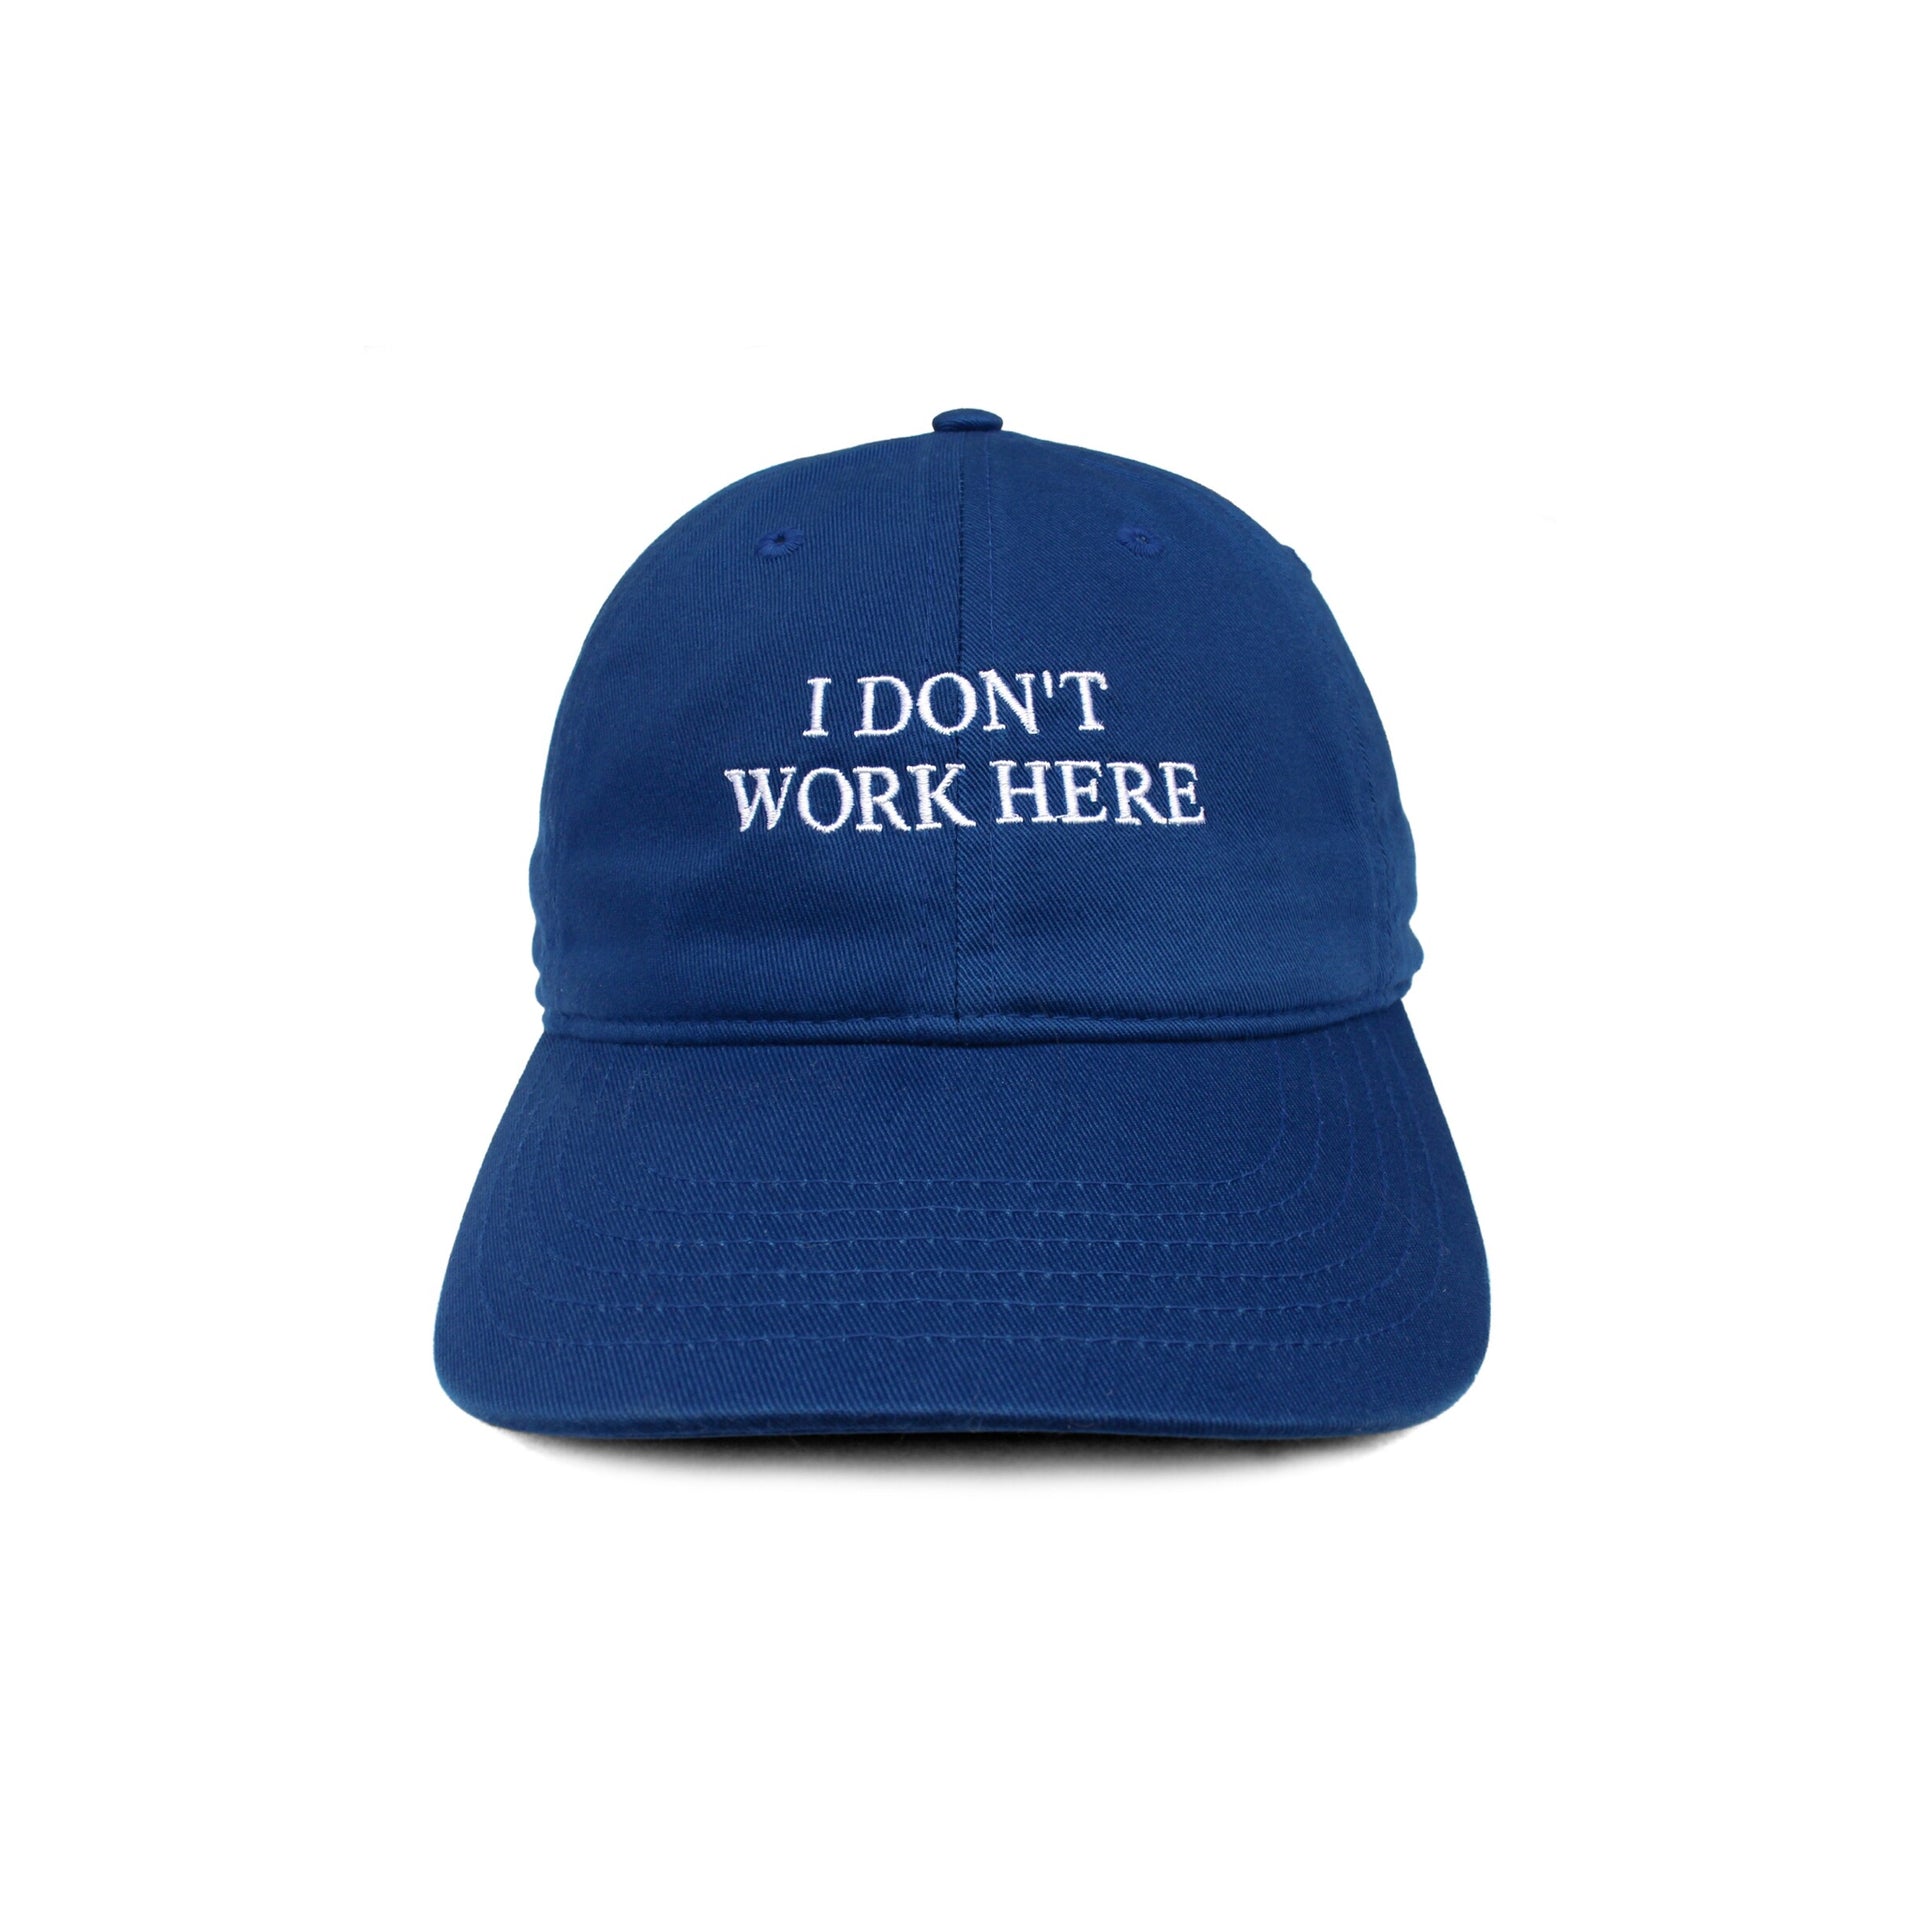 IDEA Sorry / I Don't Work Here Hat Blue